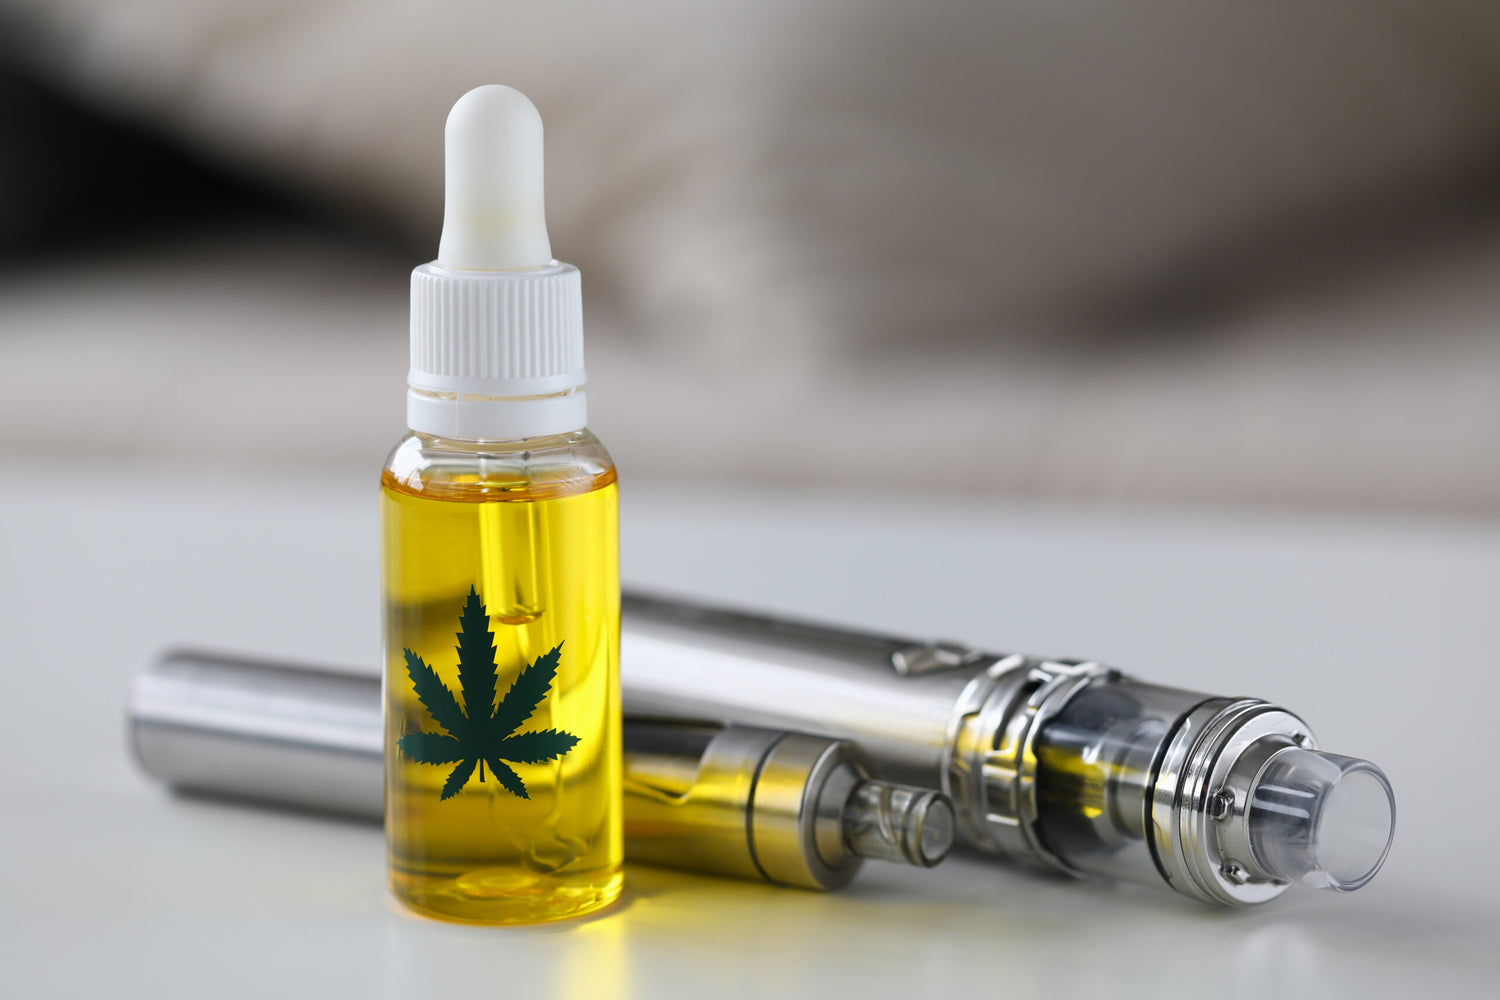 What makes the manufacture of hash oil so dangerous